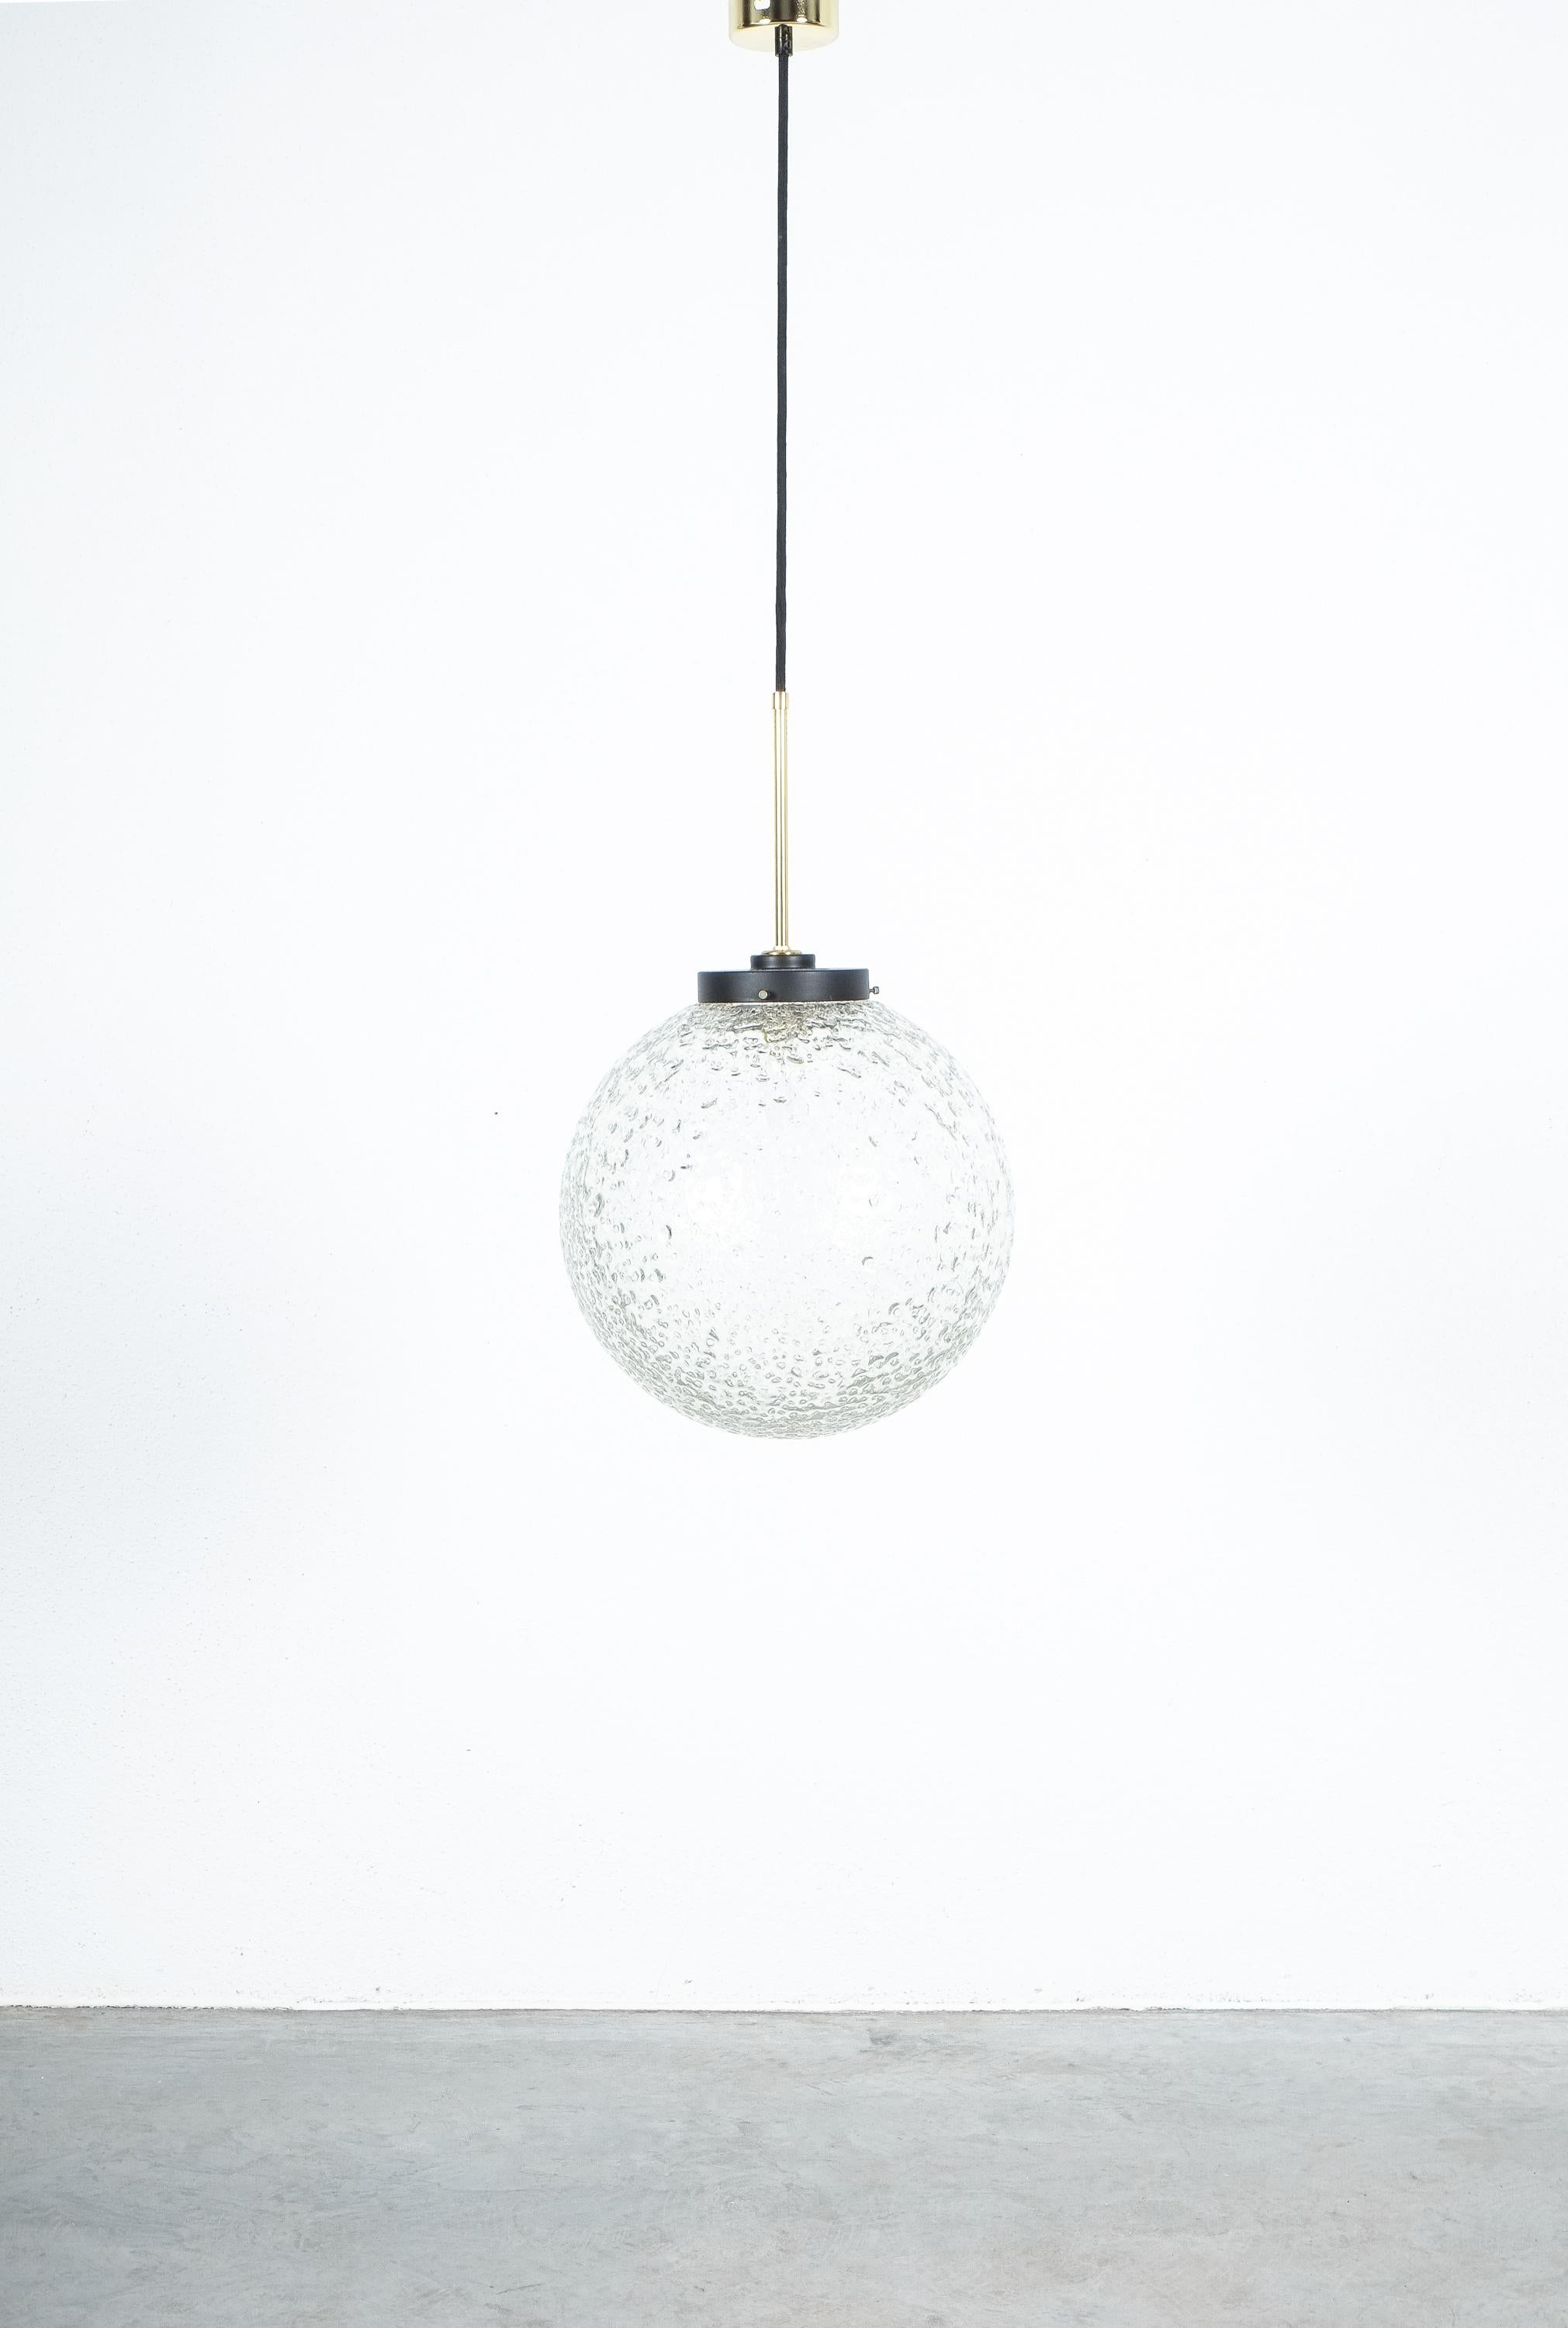 1 out 10 glass ball lights with thick clear ice glass and brass hardware by BAG Turgi, Switzerland, 1960.

Priced and sold individually

Pendant light in refurbished condition, labelled with new canopy. The globe fixtures are in very good